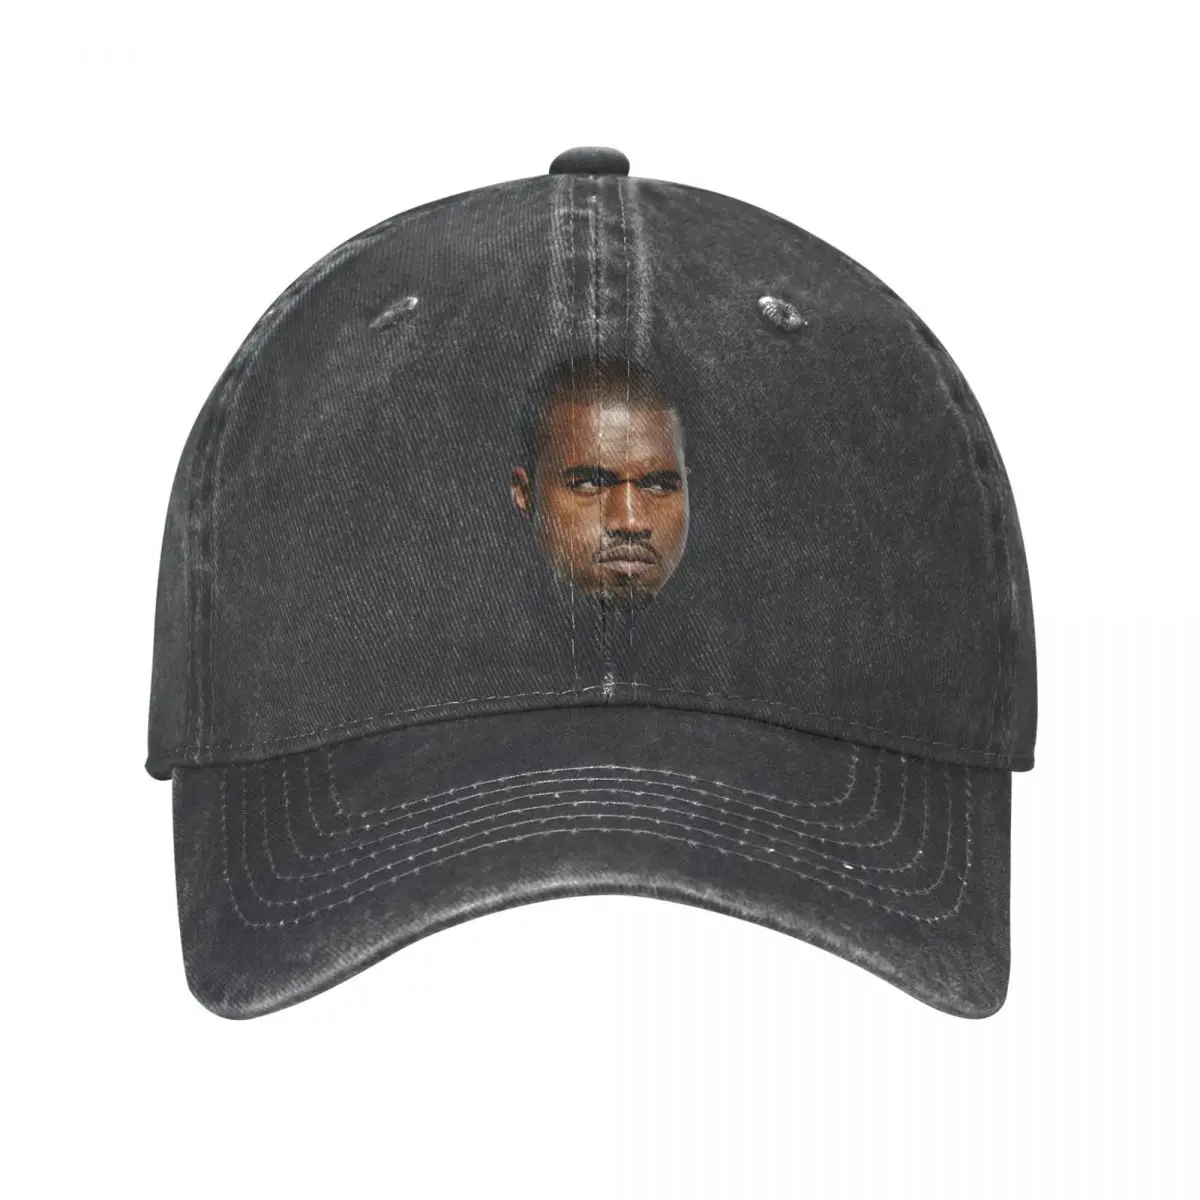 

Kanye West Head Baseball Cap Casual Distressed Washed Rapper Music Producer Sun Cap Unisex Outdoor Summer Caps Hat